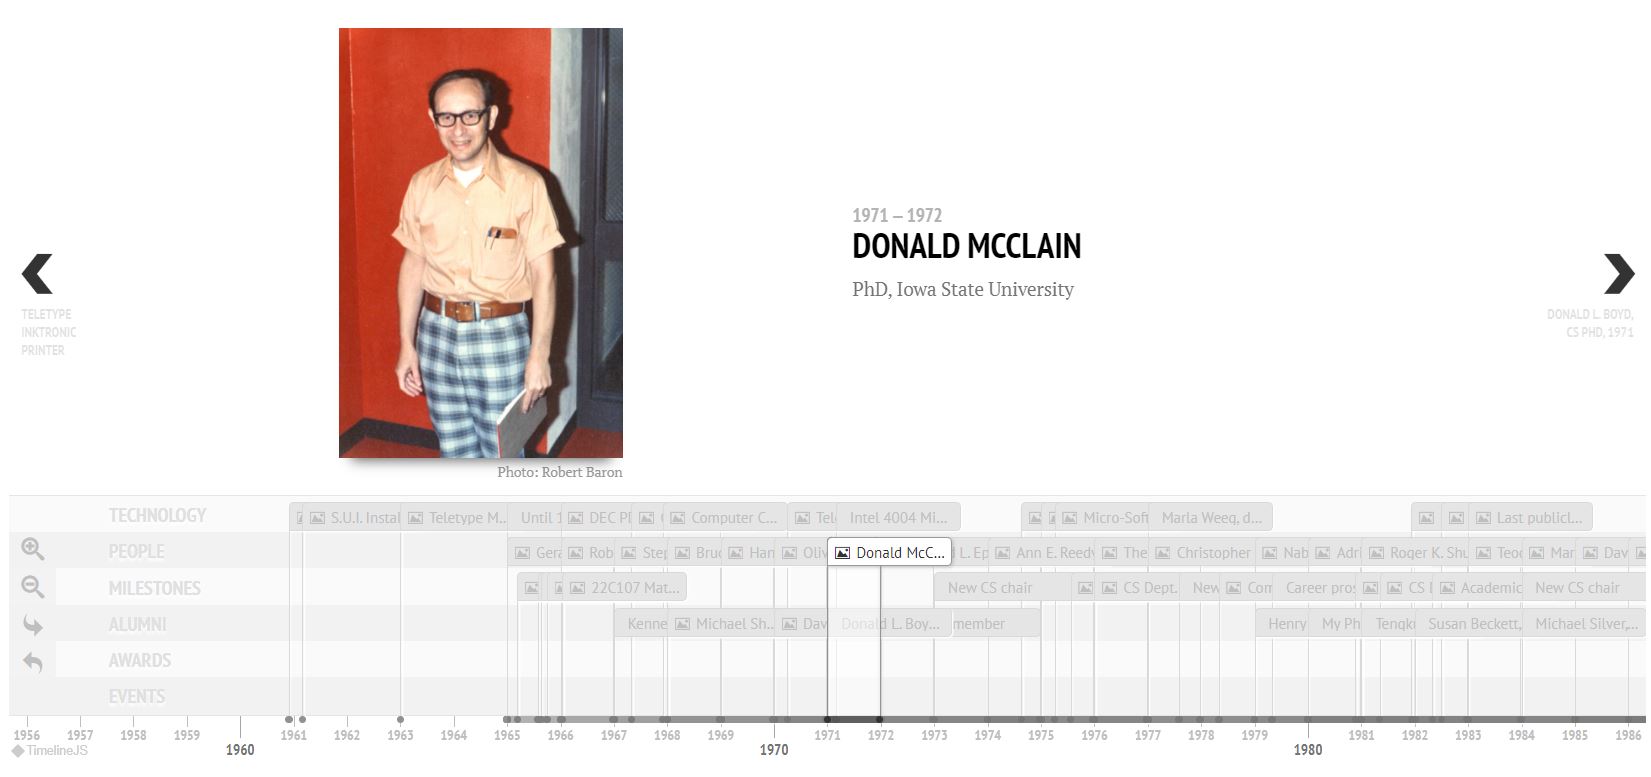 Snapshot from UIowaCS Historical Timeline with Robert Baron photo of McClain in the early 1970s